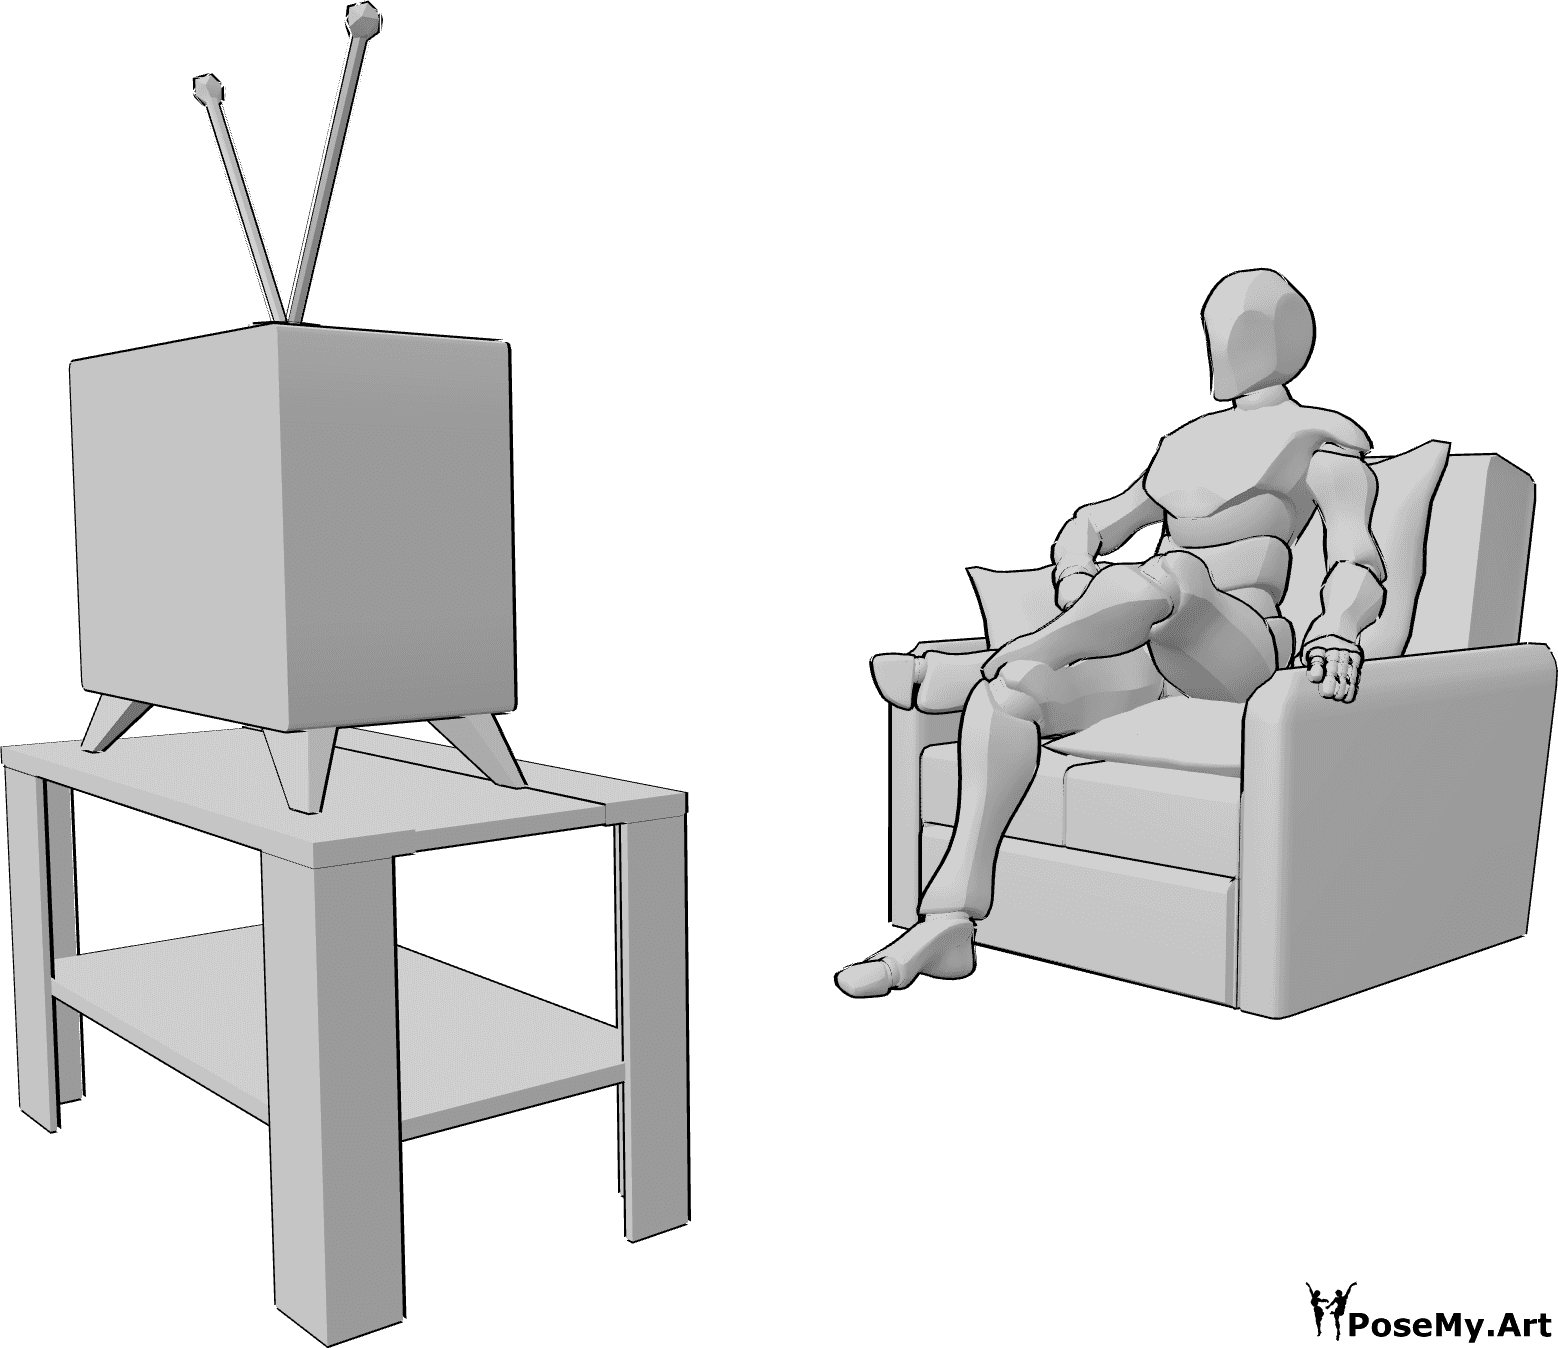 Pose Reference - Watching TV pose - Male is sitting with crossed legs and watching TV